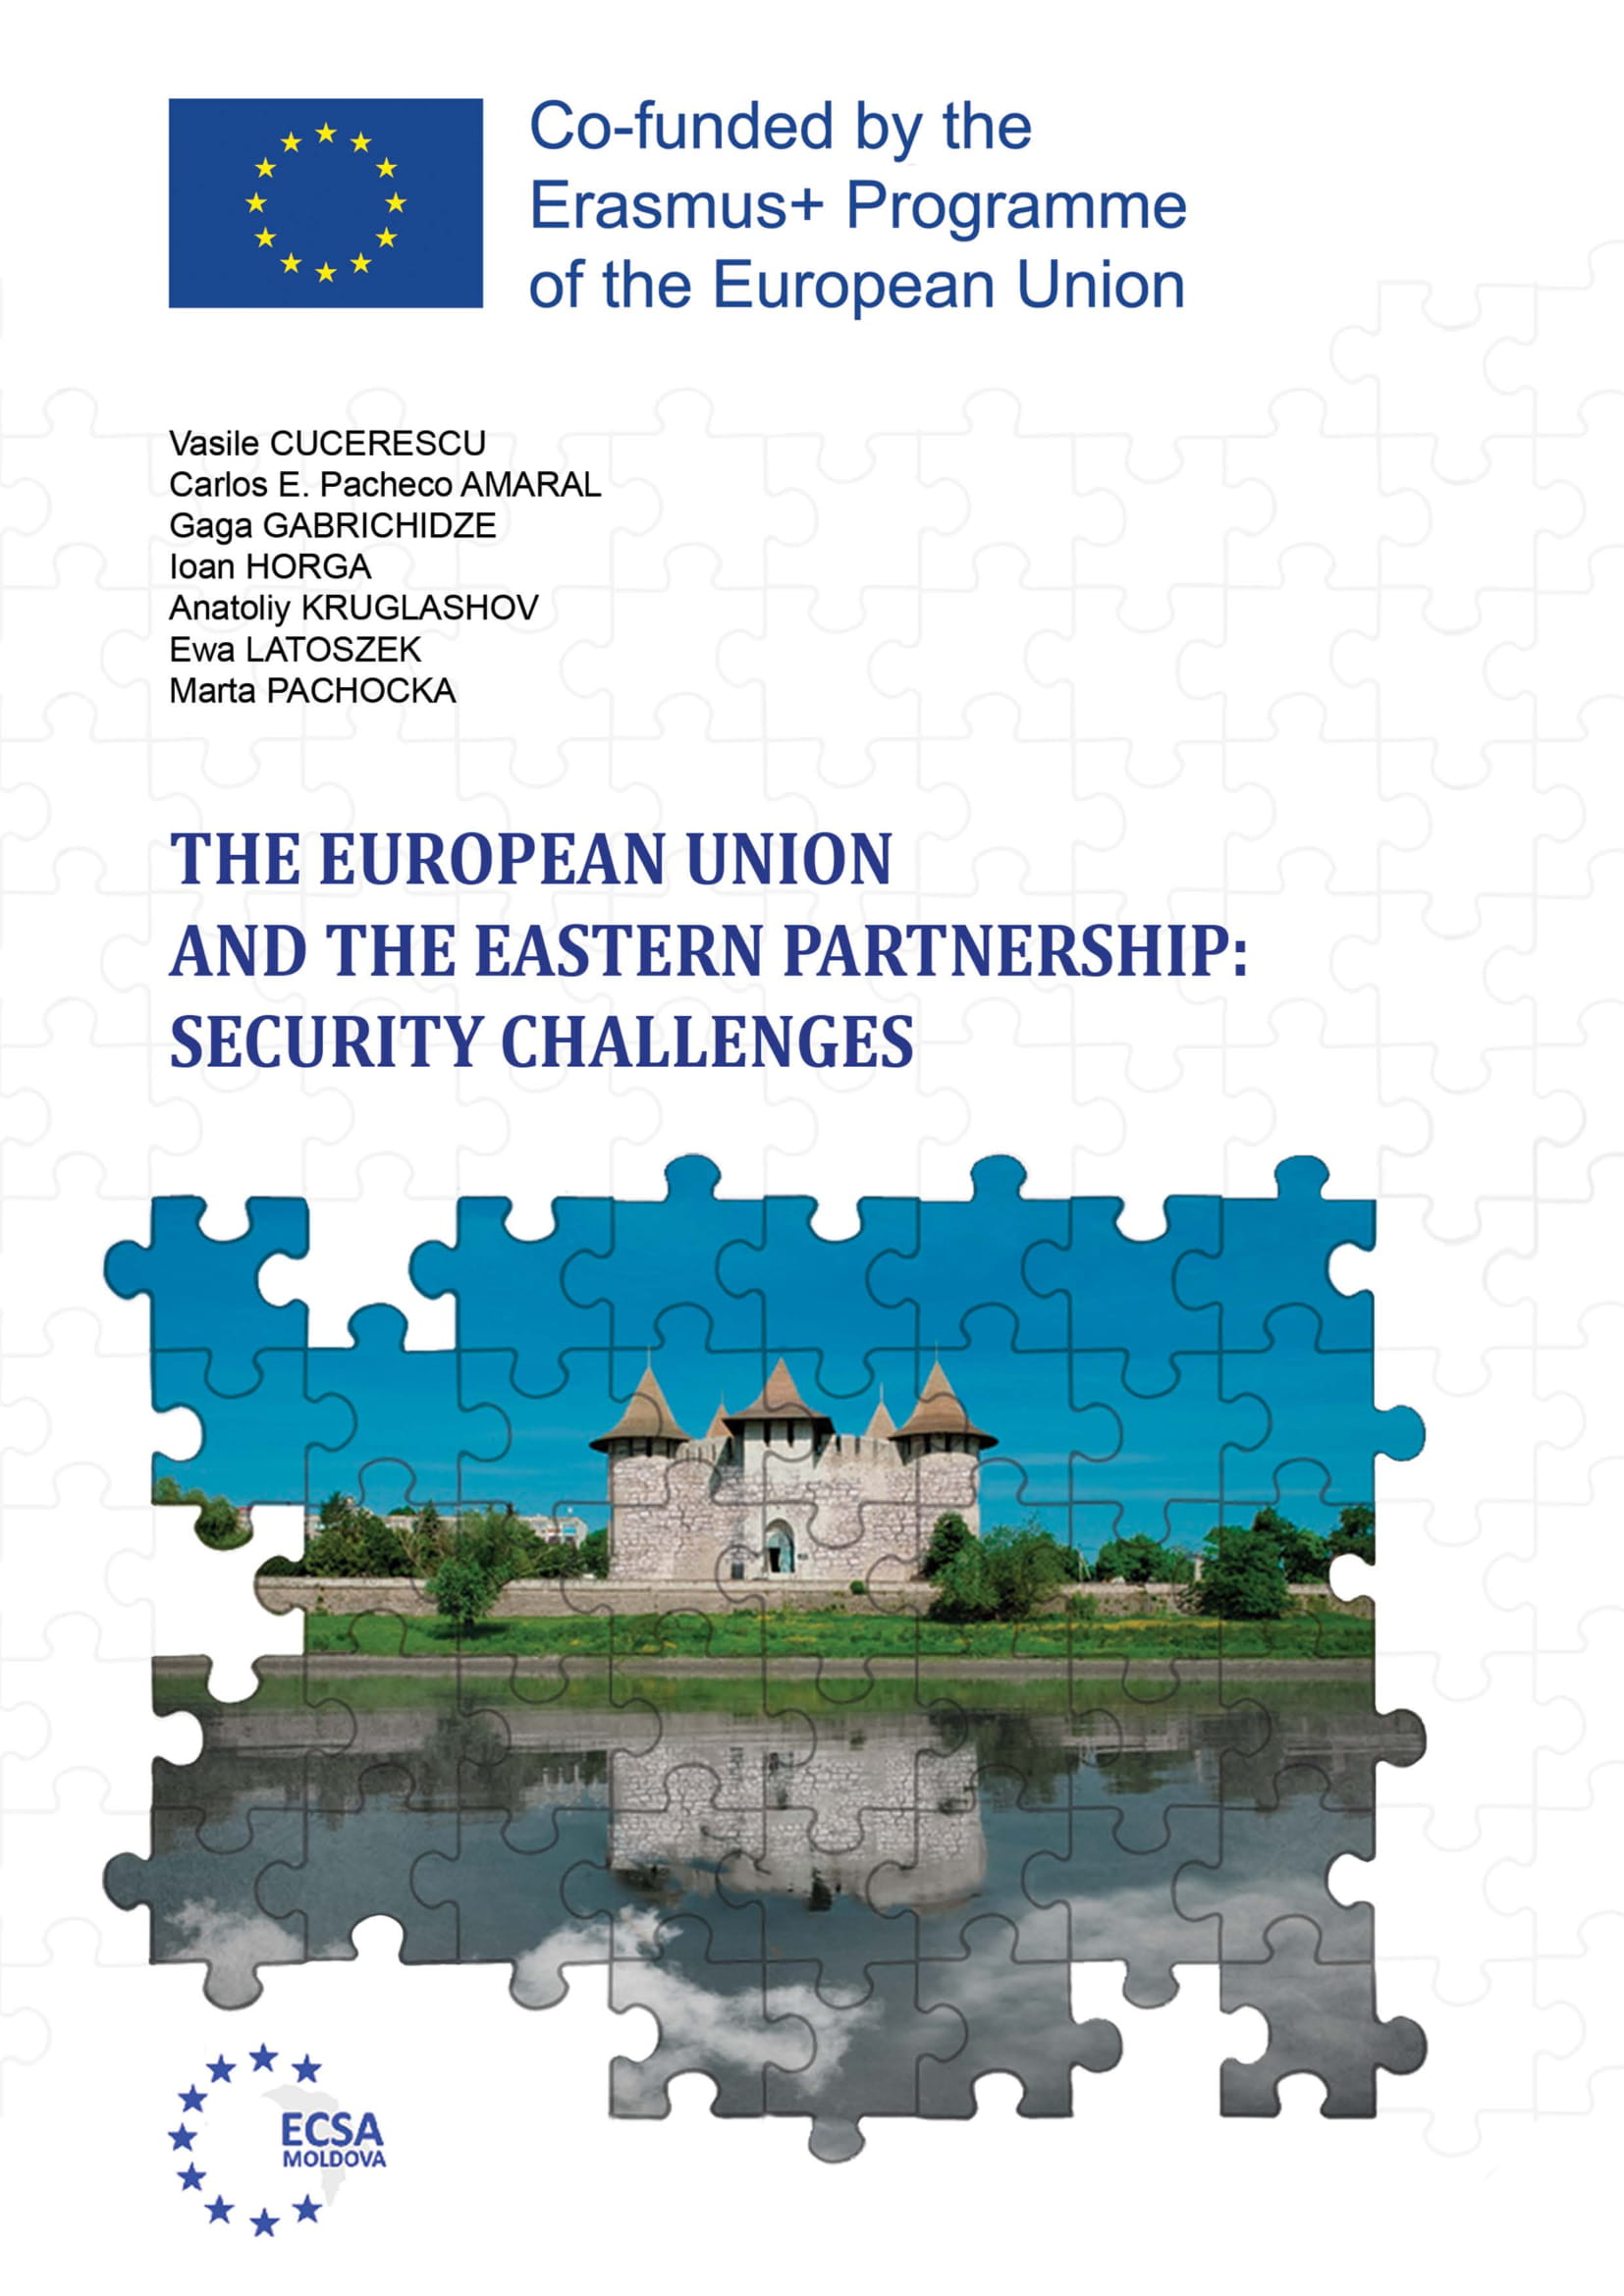 THE EASTERN PARTNERSHIP AREA IN THE GLOBAL STRATEGY FOR THE EUROPEAN UNION’S FOREIGN AND SECURITY POLICY: WHAT IS SHARED BY PARTNERS? Cover Image